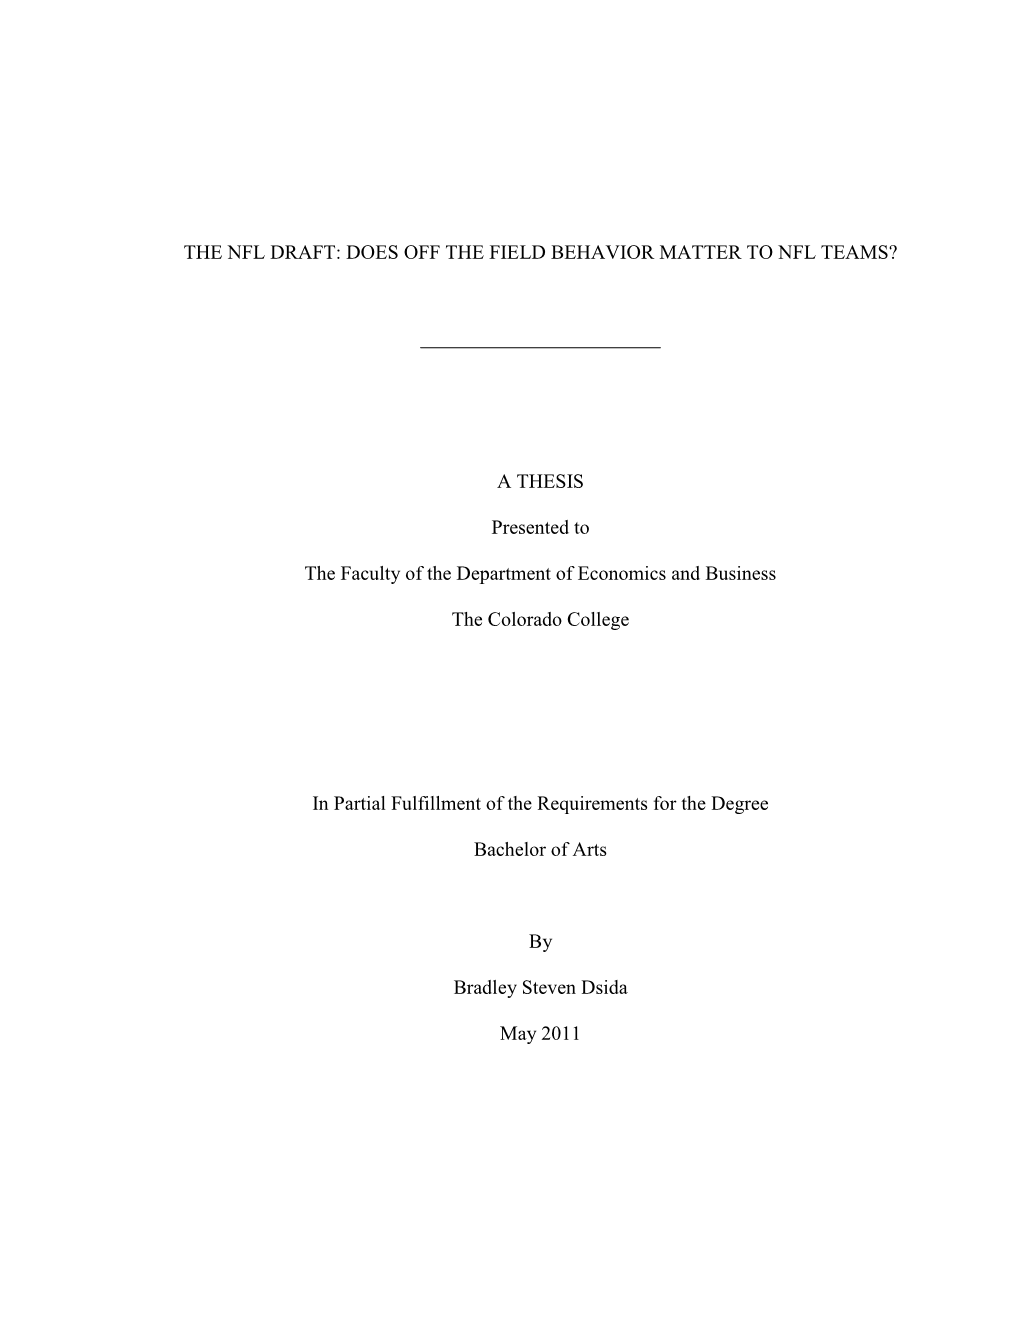 THE NFL DRAFT: DOES OFF the FIELD BEHAVIOR MATTER to NFL TEAMS? a THESIS Presented to the Faculty of the Department of Economics